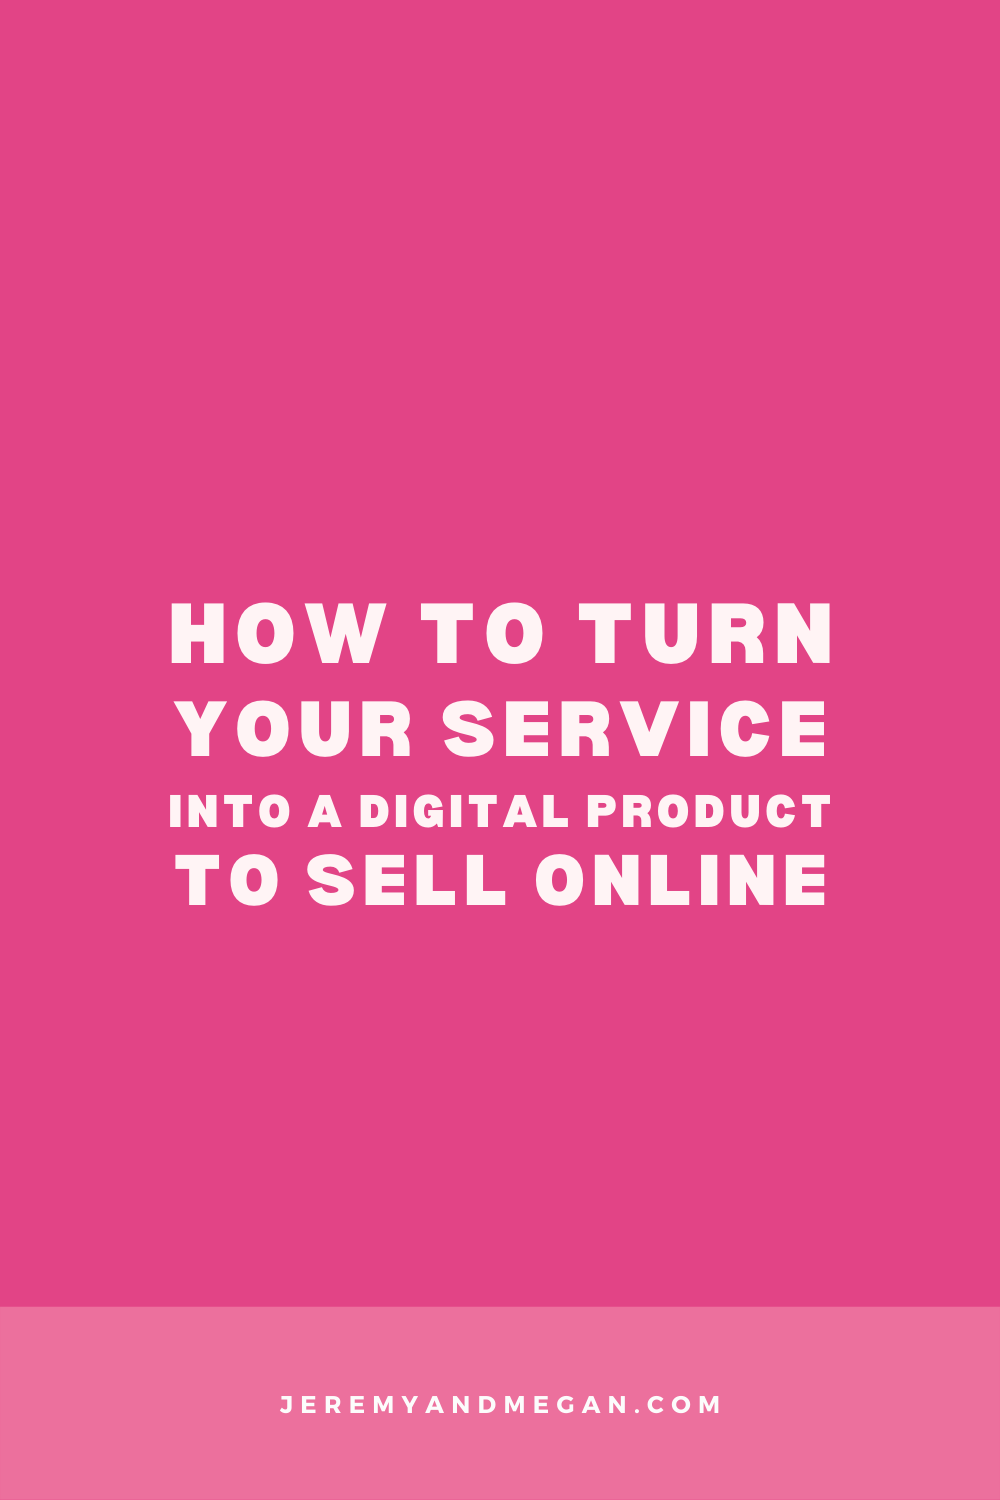 How to Turn Your Service into a Digital Product to Sell Online: two tips from digital product creator + educator Megan Martin